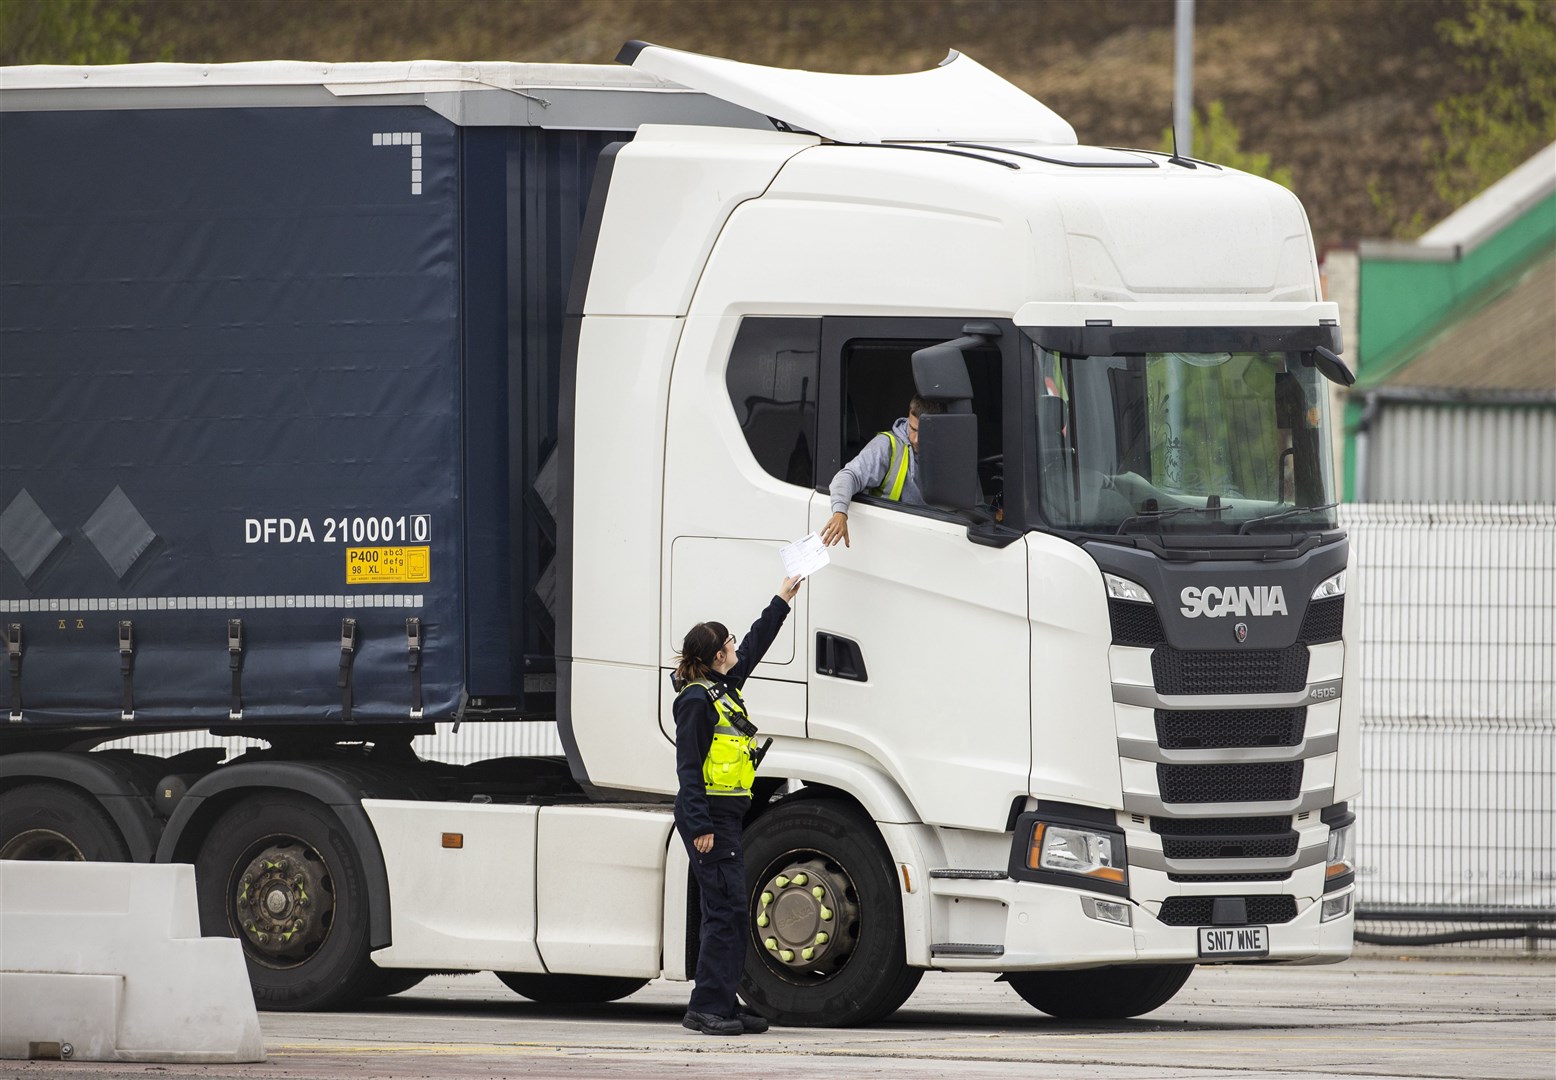 The Northern Ireland Protocol has led to checks on some goods entering Northern Ireland (Liam McBurney/PA)